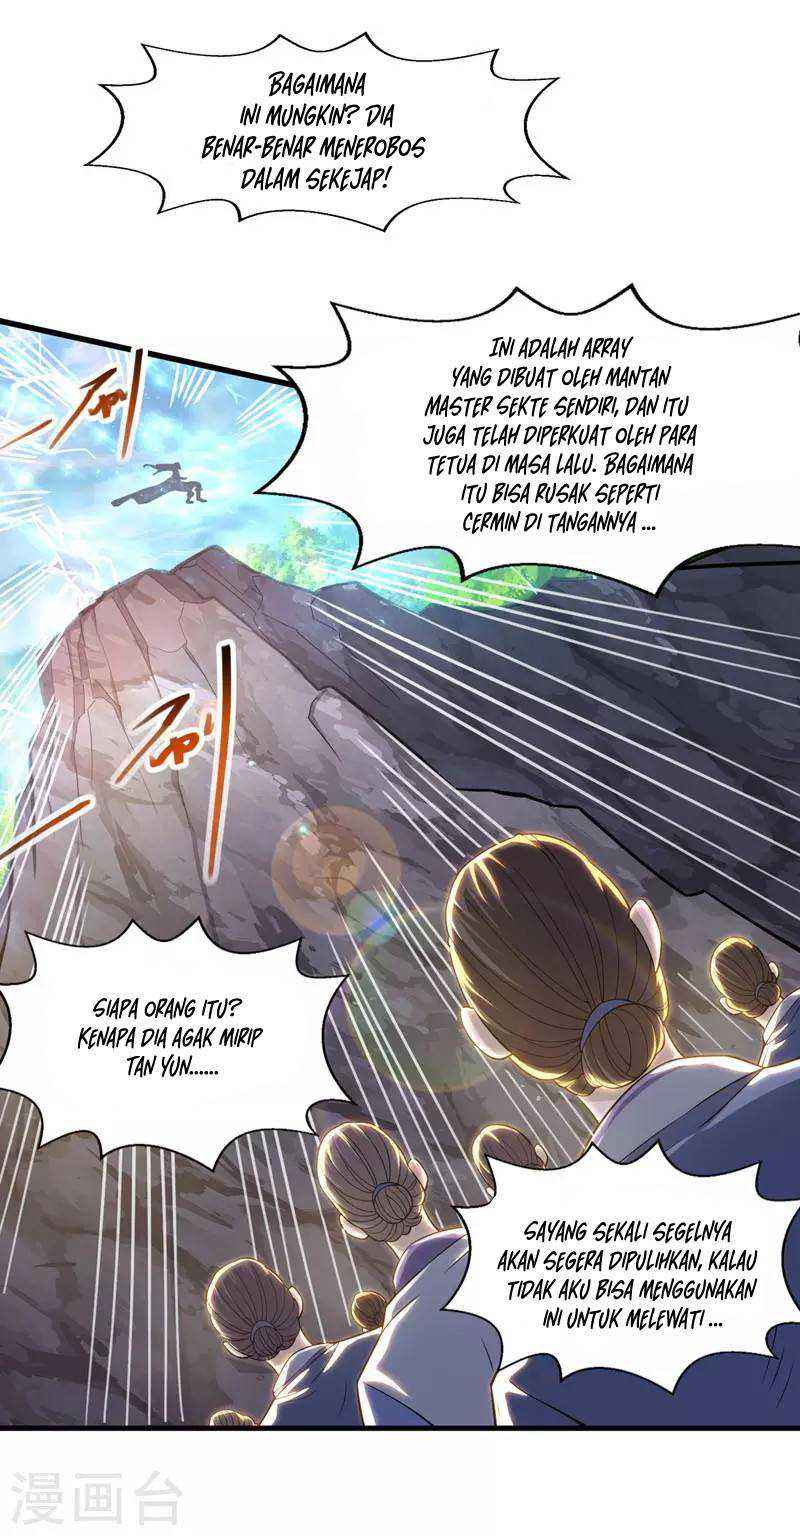 Against The Heaven Supreme (Heaven Guards) Chapter 58 - 157